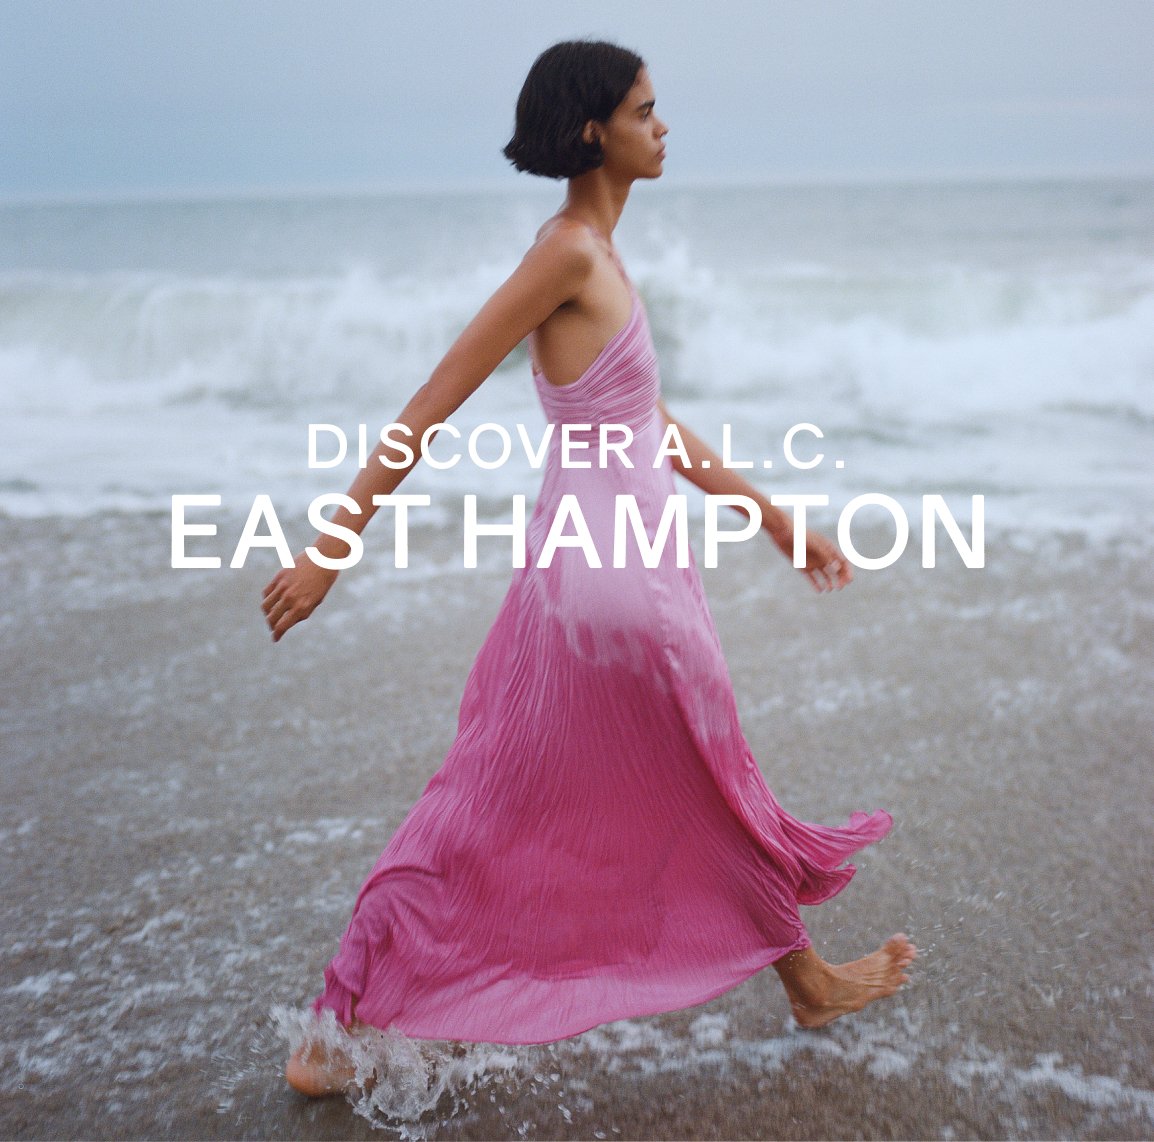 Everything You Need To Know About Unsubscribed, East Hampton's